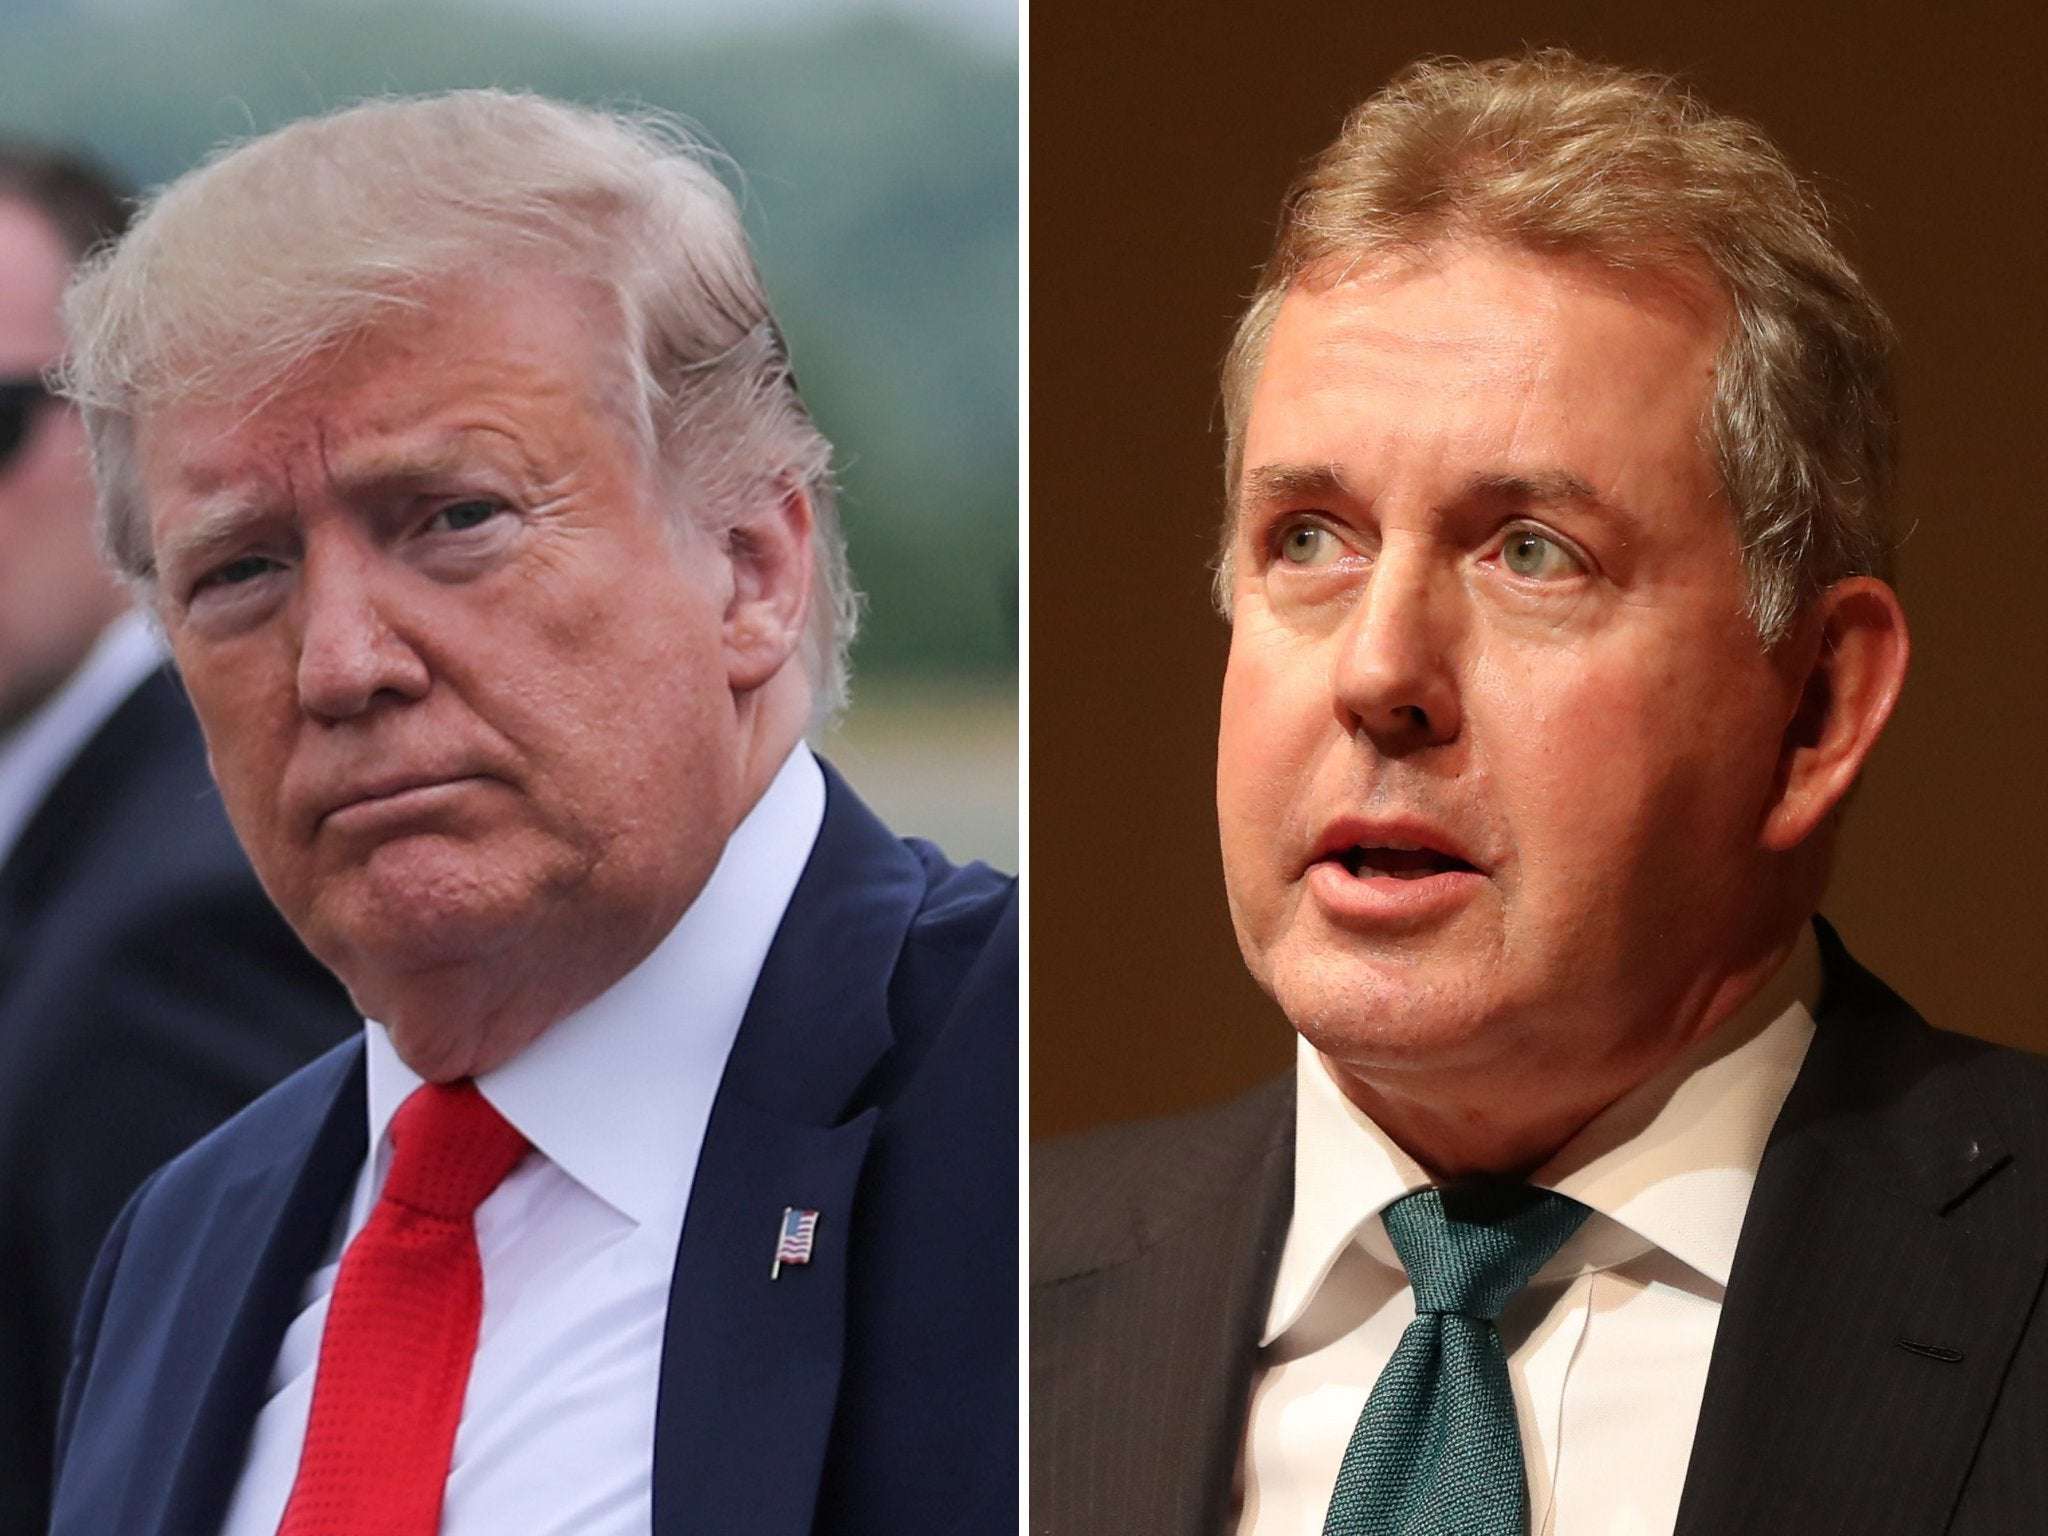 image for Trump 'pulled out of Iran nuclear deal to spite Obama', suggests Kim Darroch in new leaked memo